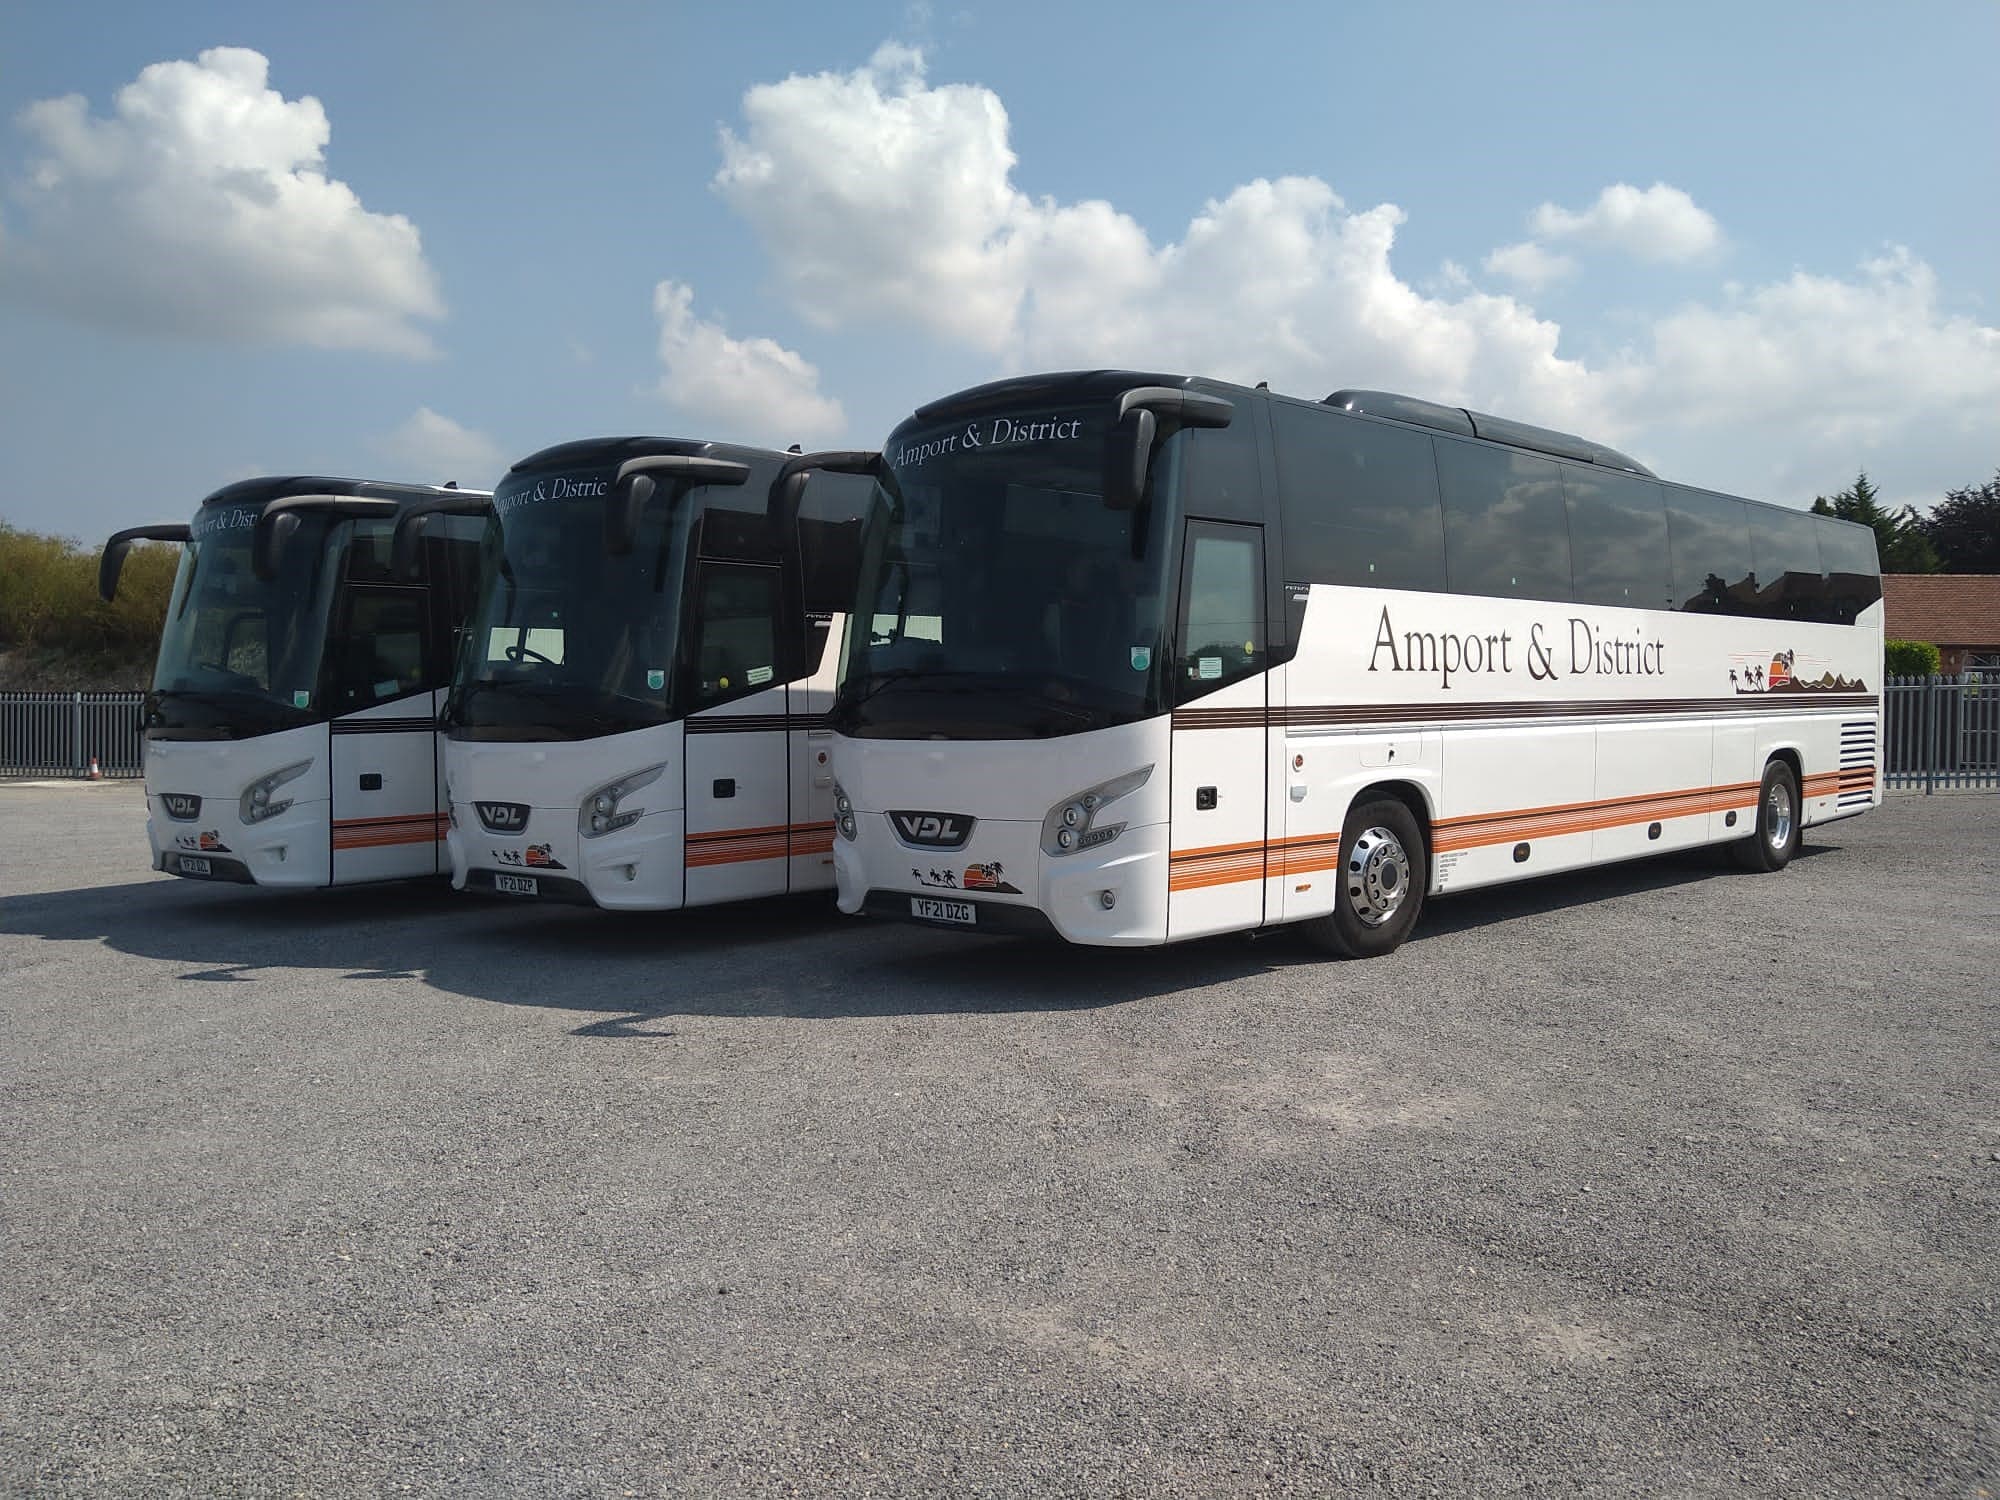 Amport and District VDL Futura FHD2s